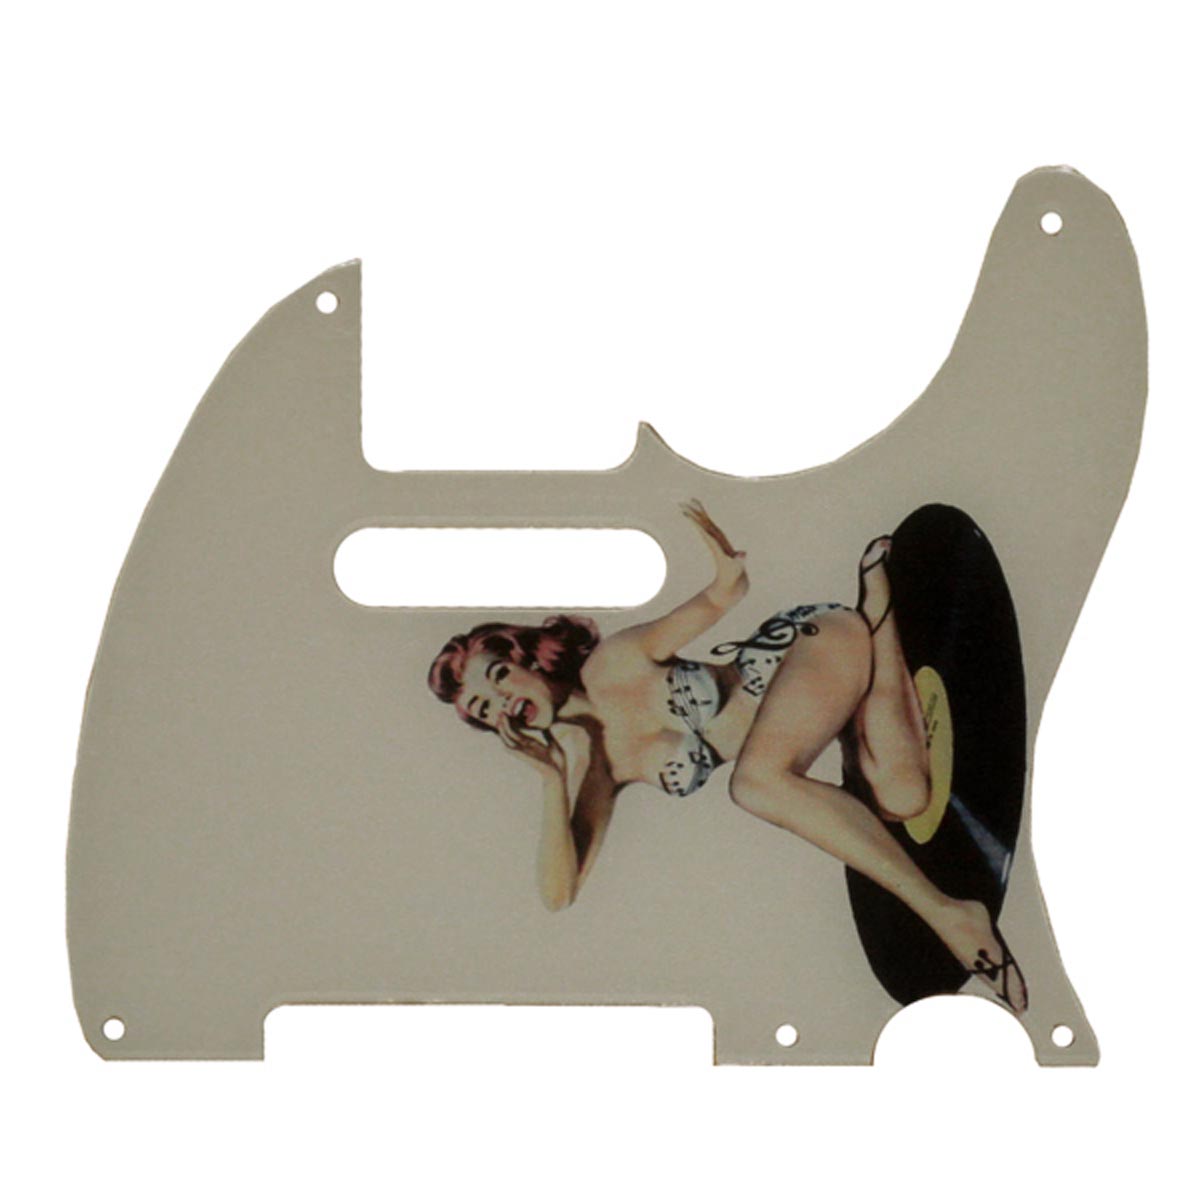 Custom Graphical Pickguard to fit Fender Tele Telecaster Pin Up Girl Short Shorts WH 